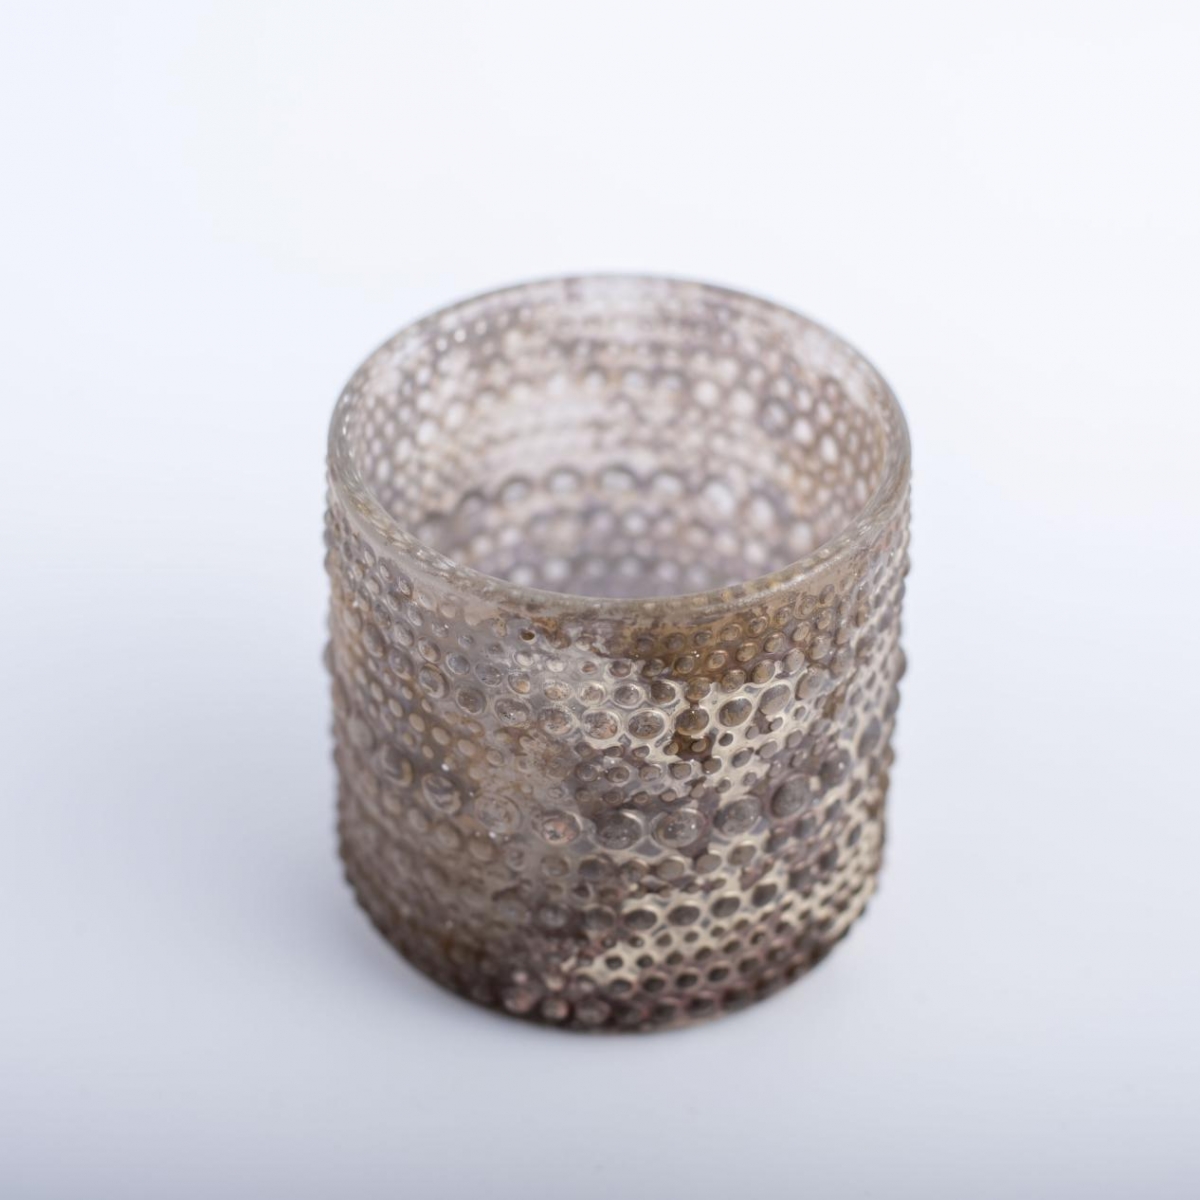 Retro Candle Holder ：Full Of Dots ，Embossed Glass Jar , Antique Craft , Candle Jar ,China Factory ,Price-HOWCANDLE-Candles,Scented Candles,Aromatherapy Candles,Soy Candles,Vegan Candles,Jar Candles,Pillar Candles,Candle Gift Sets,Essential Oils,Reed Diffuser,Candle Holder,